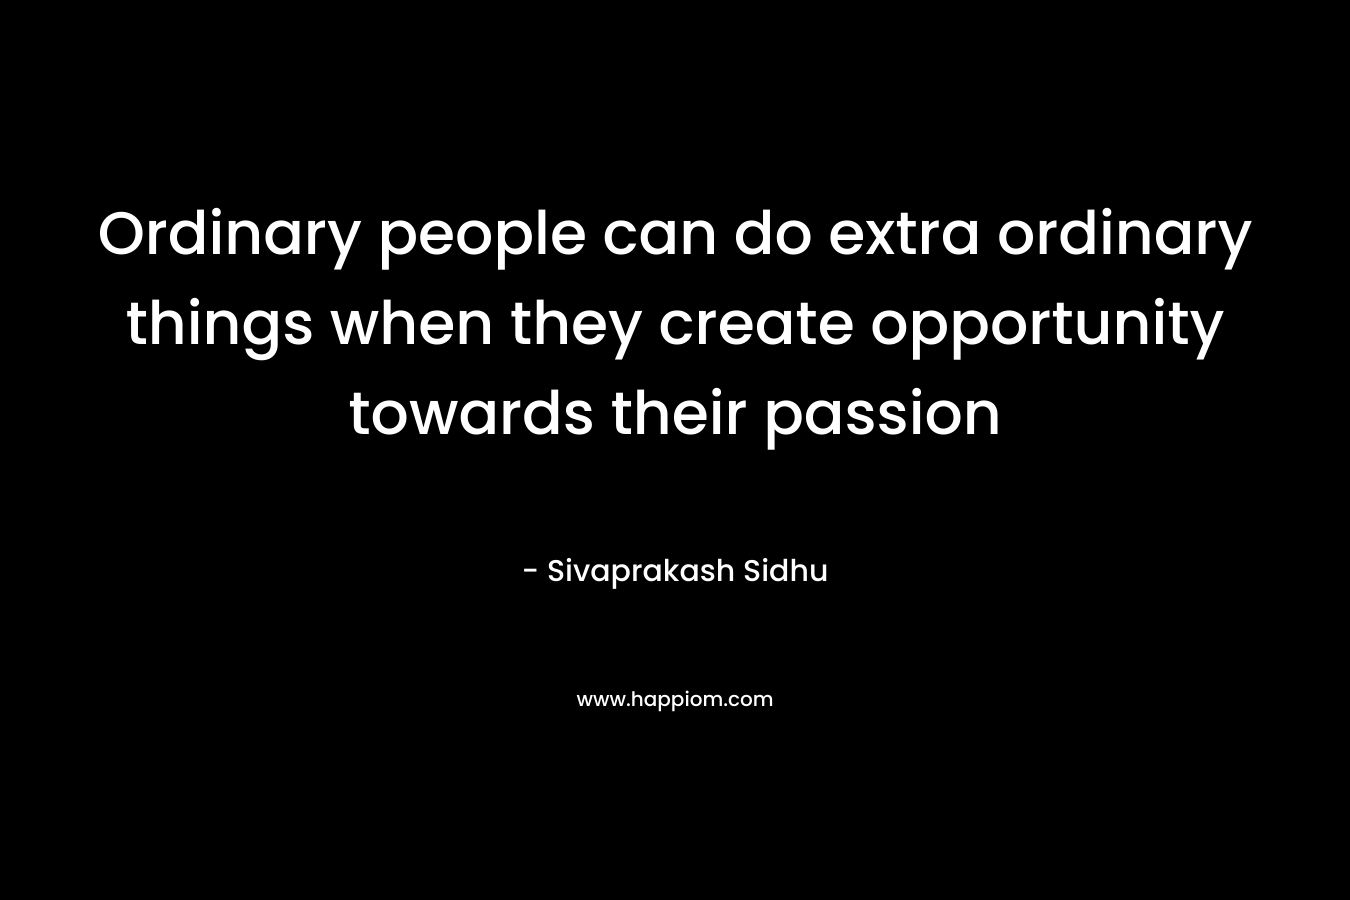 Ordinary people can do extra ordinary things when they create opportunity towards their passion